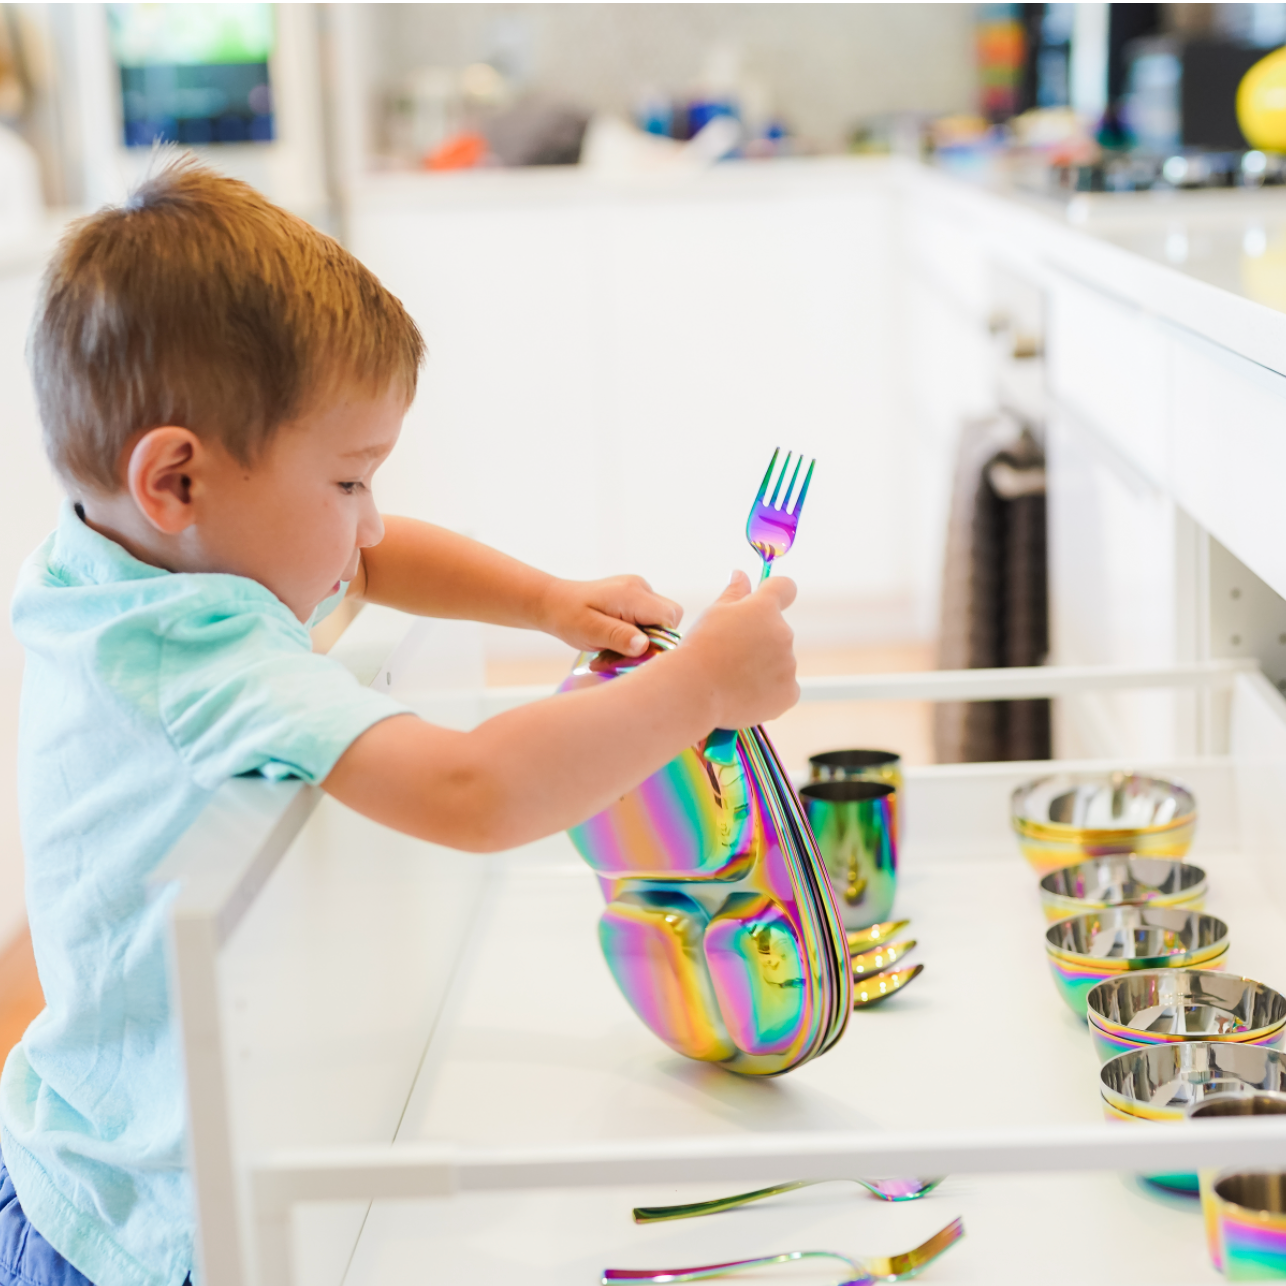 Ways kids can help with chores this New Year